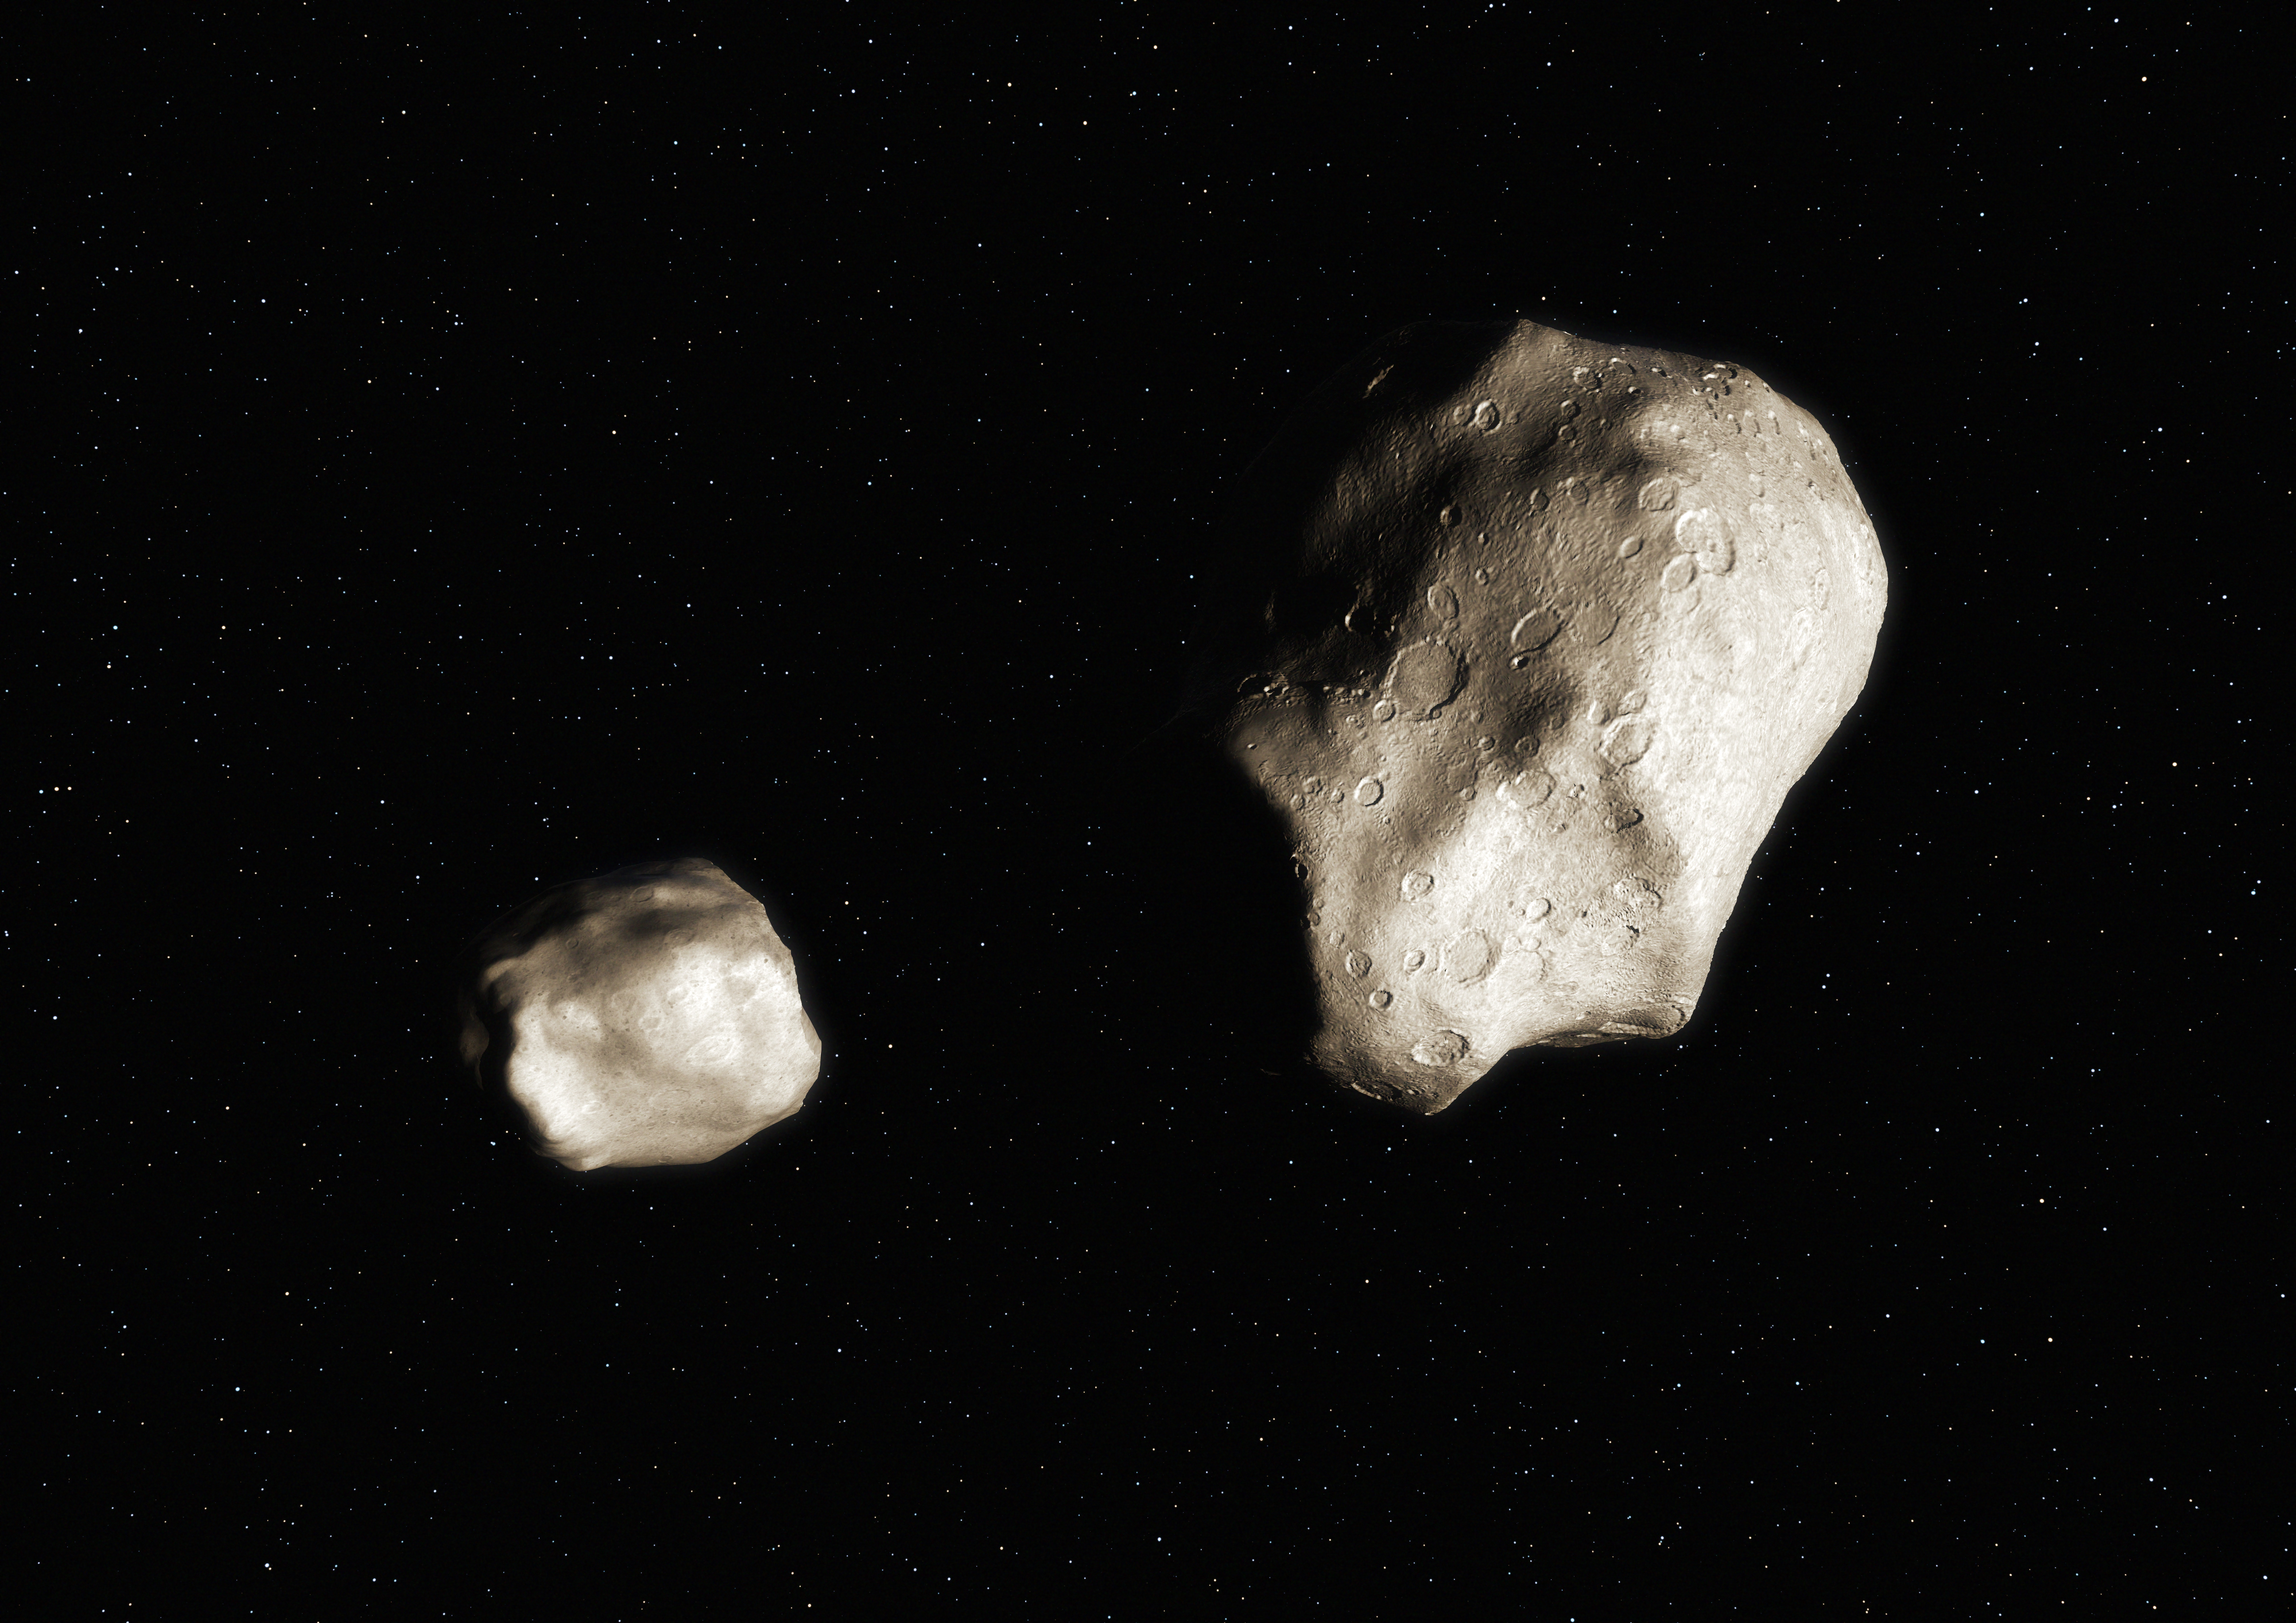 Artistic view of an asteroid pair during its transient proto-binary phase which happened less than 1 million years ago. Typically for this unstable proto-binary system, the primary has a diameter of a few kilometers, while the companion is 60% the primary size or less. Shortly after its formation, the secondary will gently escape forming an asteroid pair which will share the same orbits around the sun. (credit: ESO//L. Calçada)